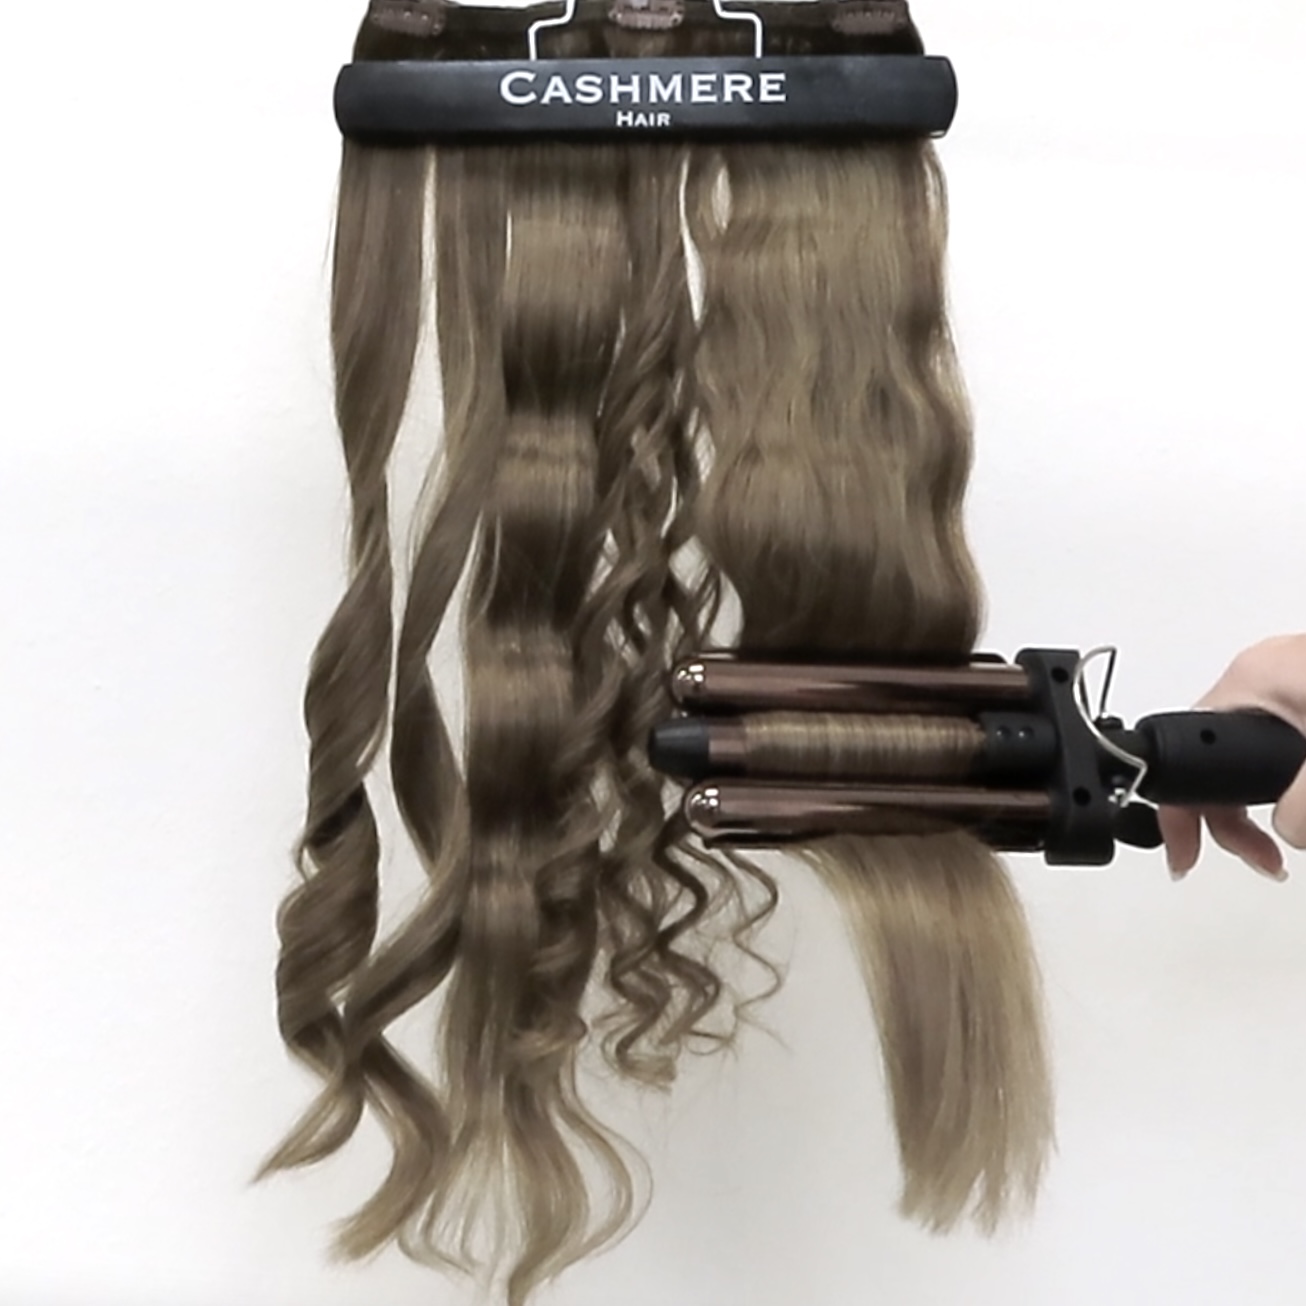 clamping 3 barrel waver crimper onto cashmere hair extensions